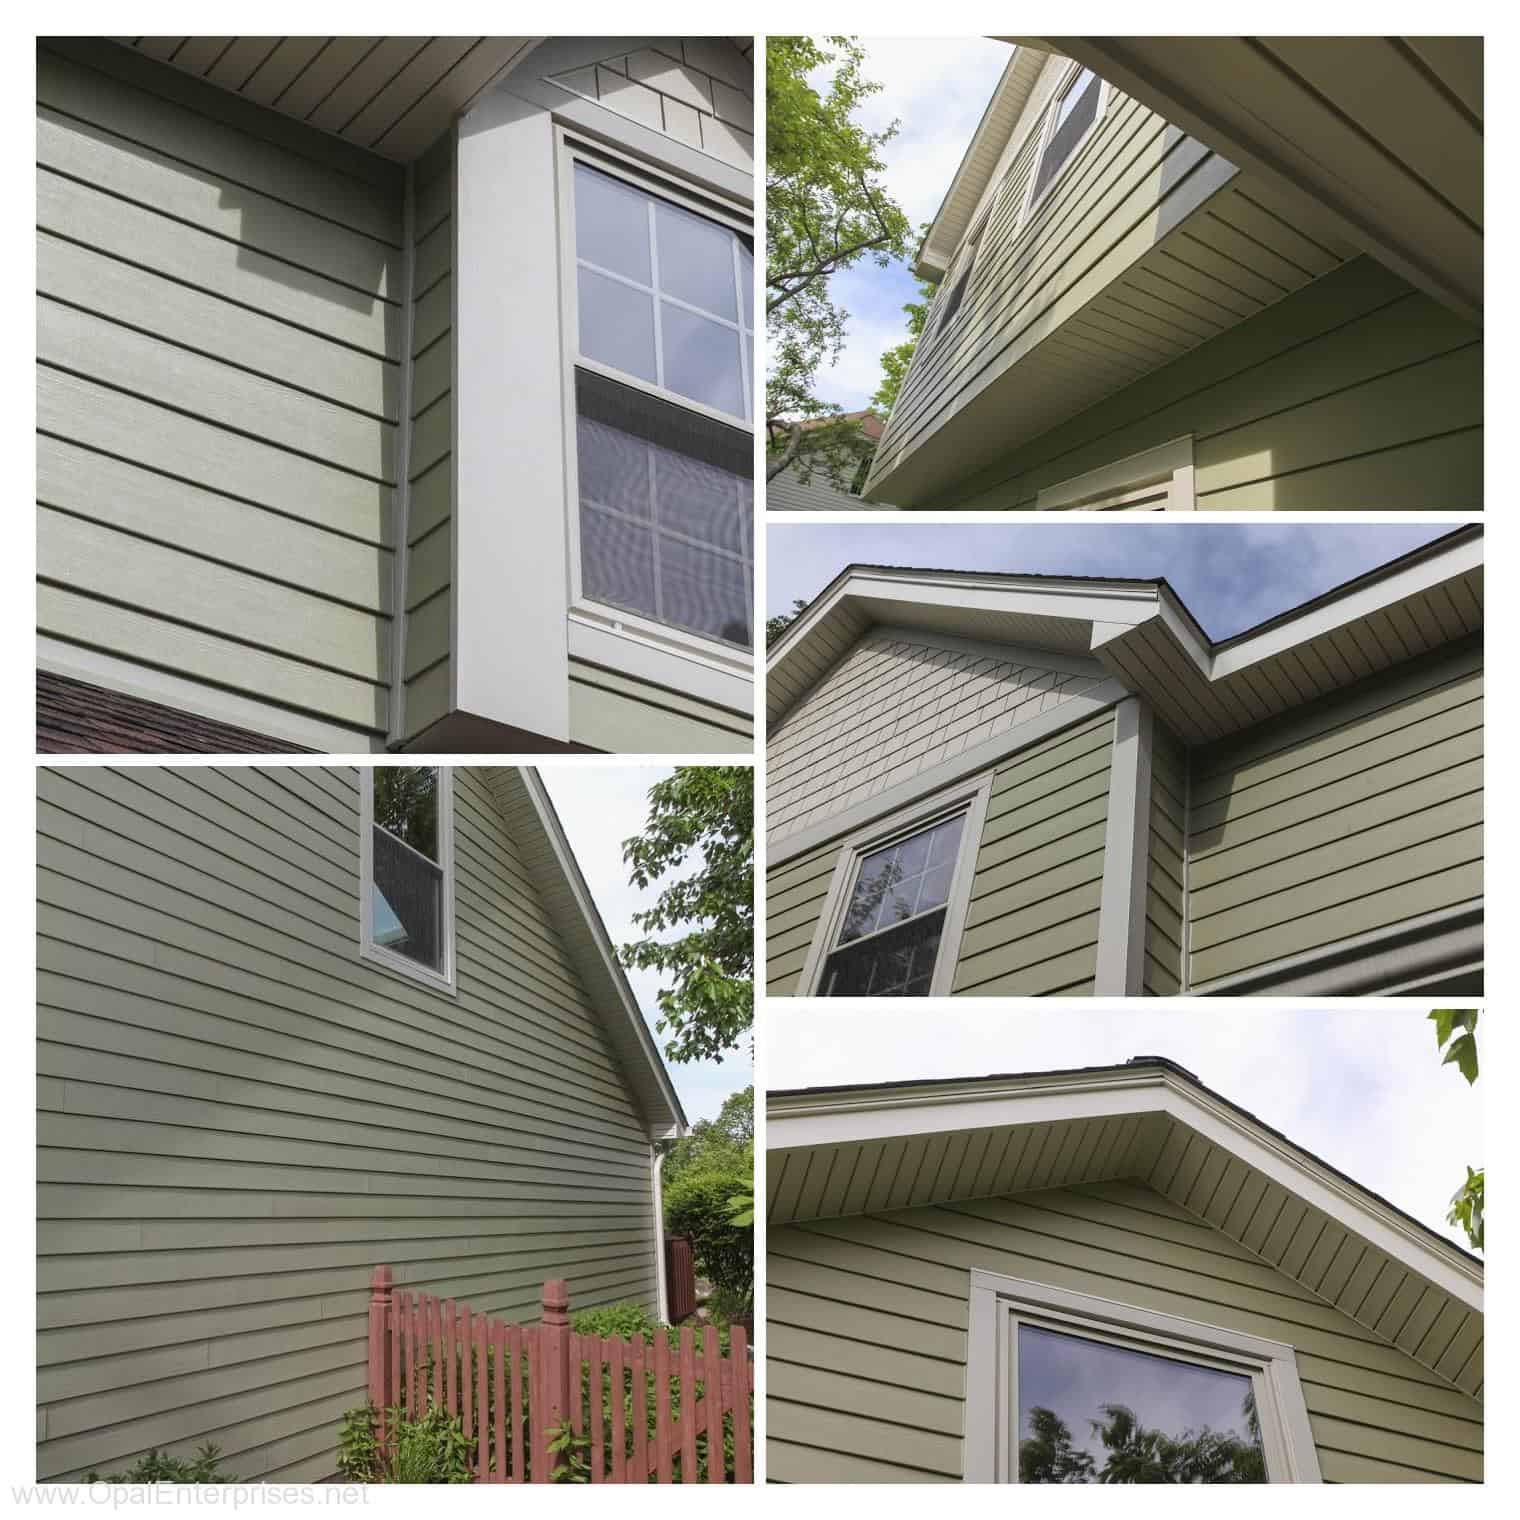 New Siding in Naperville installed by Opal Enterprises. James Hardie Siding in Heathered Moss with Hardie Shake in Navajo Beige